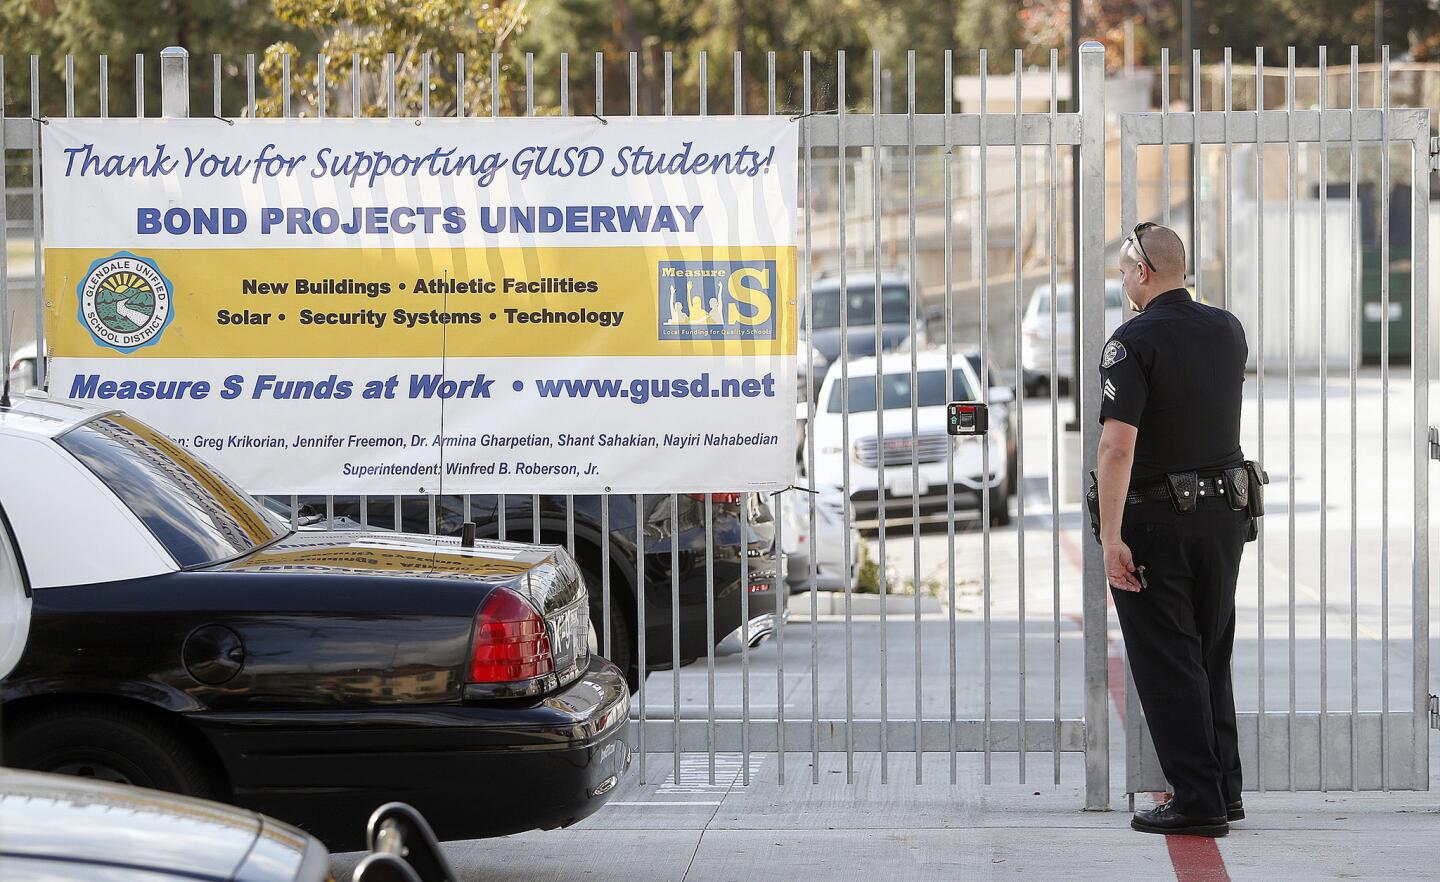 Photo Gallery: Bomb scare at Verdugo Woodland Elementary School in Glendale